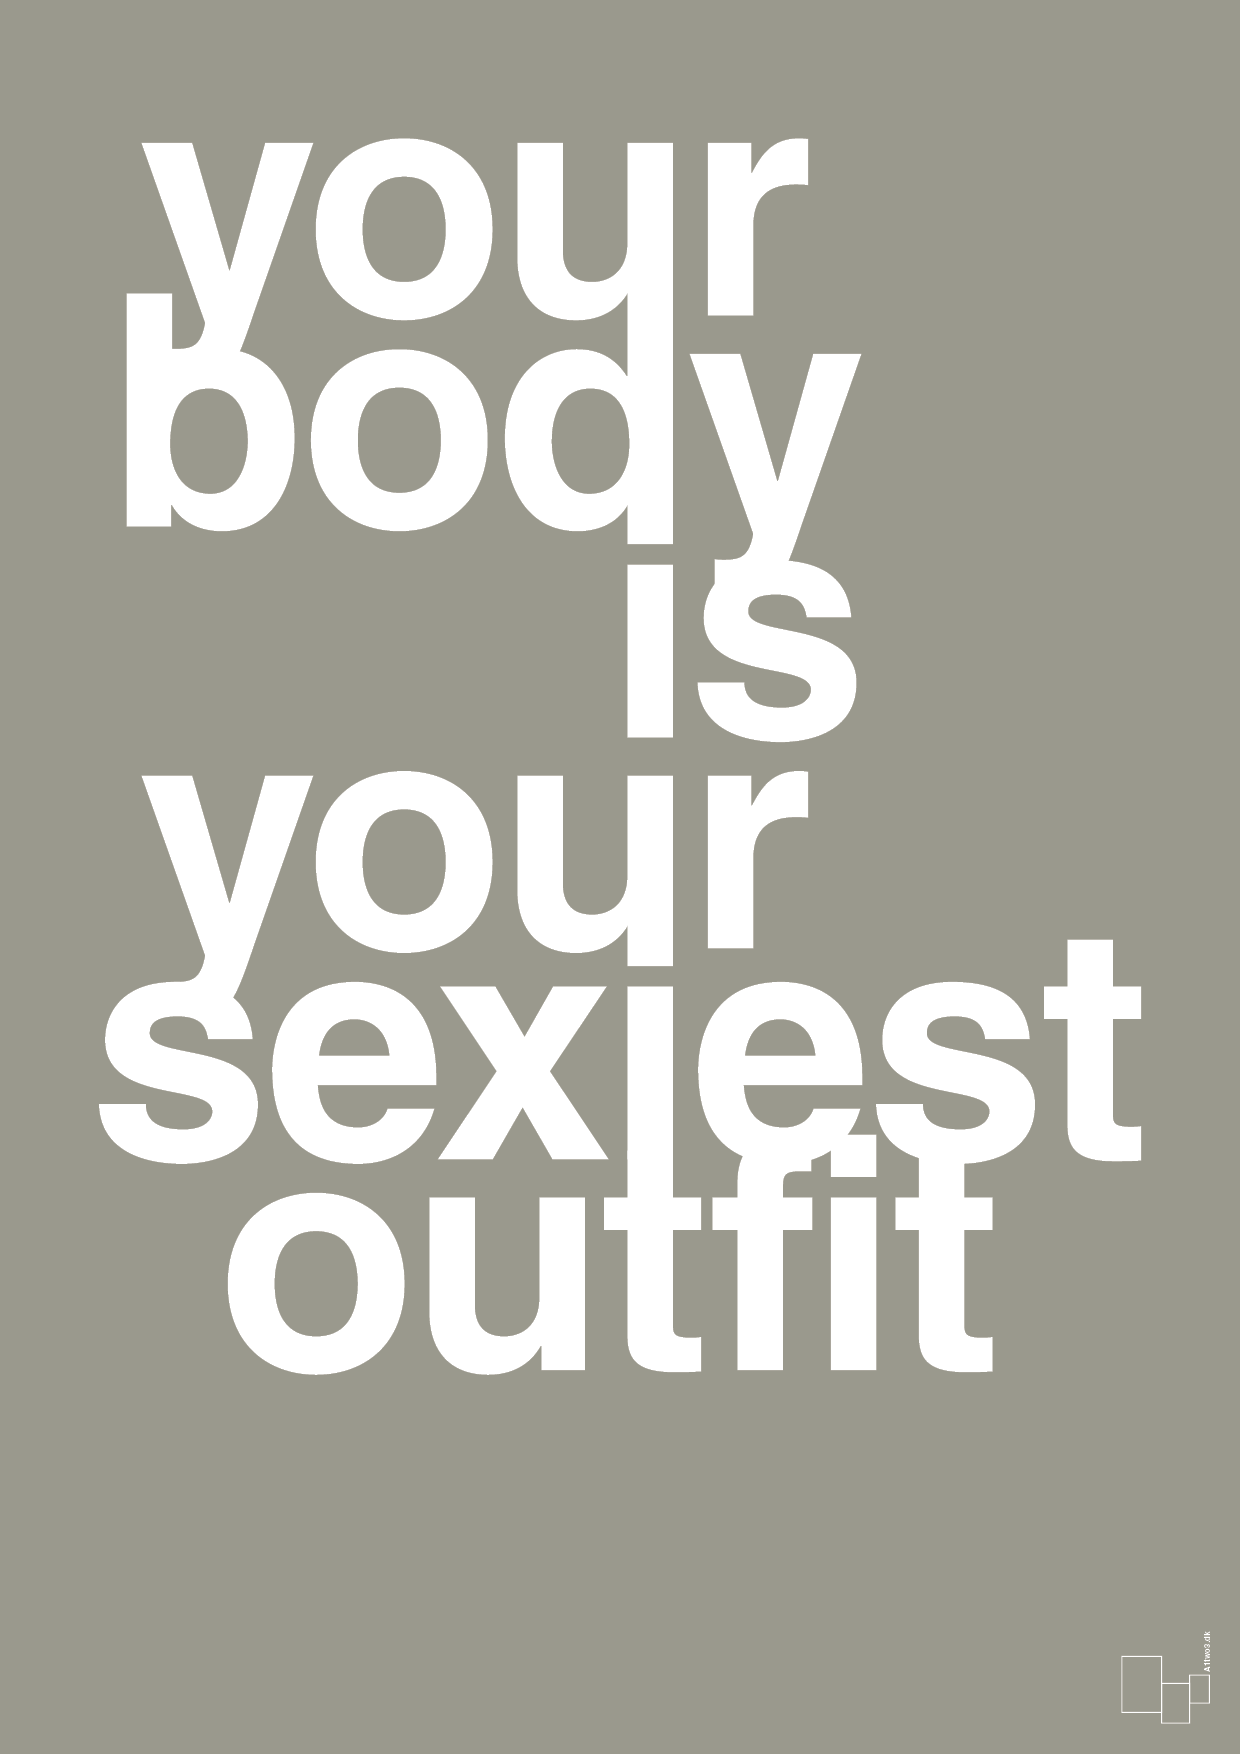 your body is your sexiest outfit - Plakat med Sport & Fritid i Battleship Gray